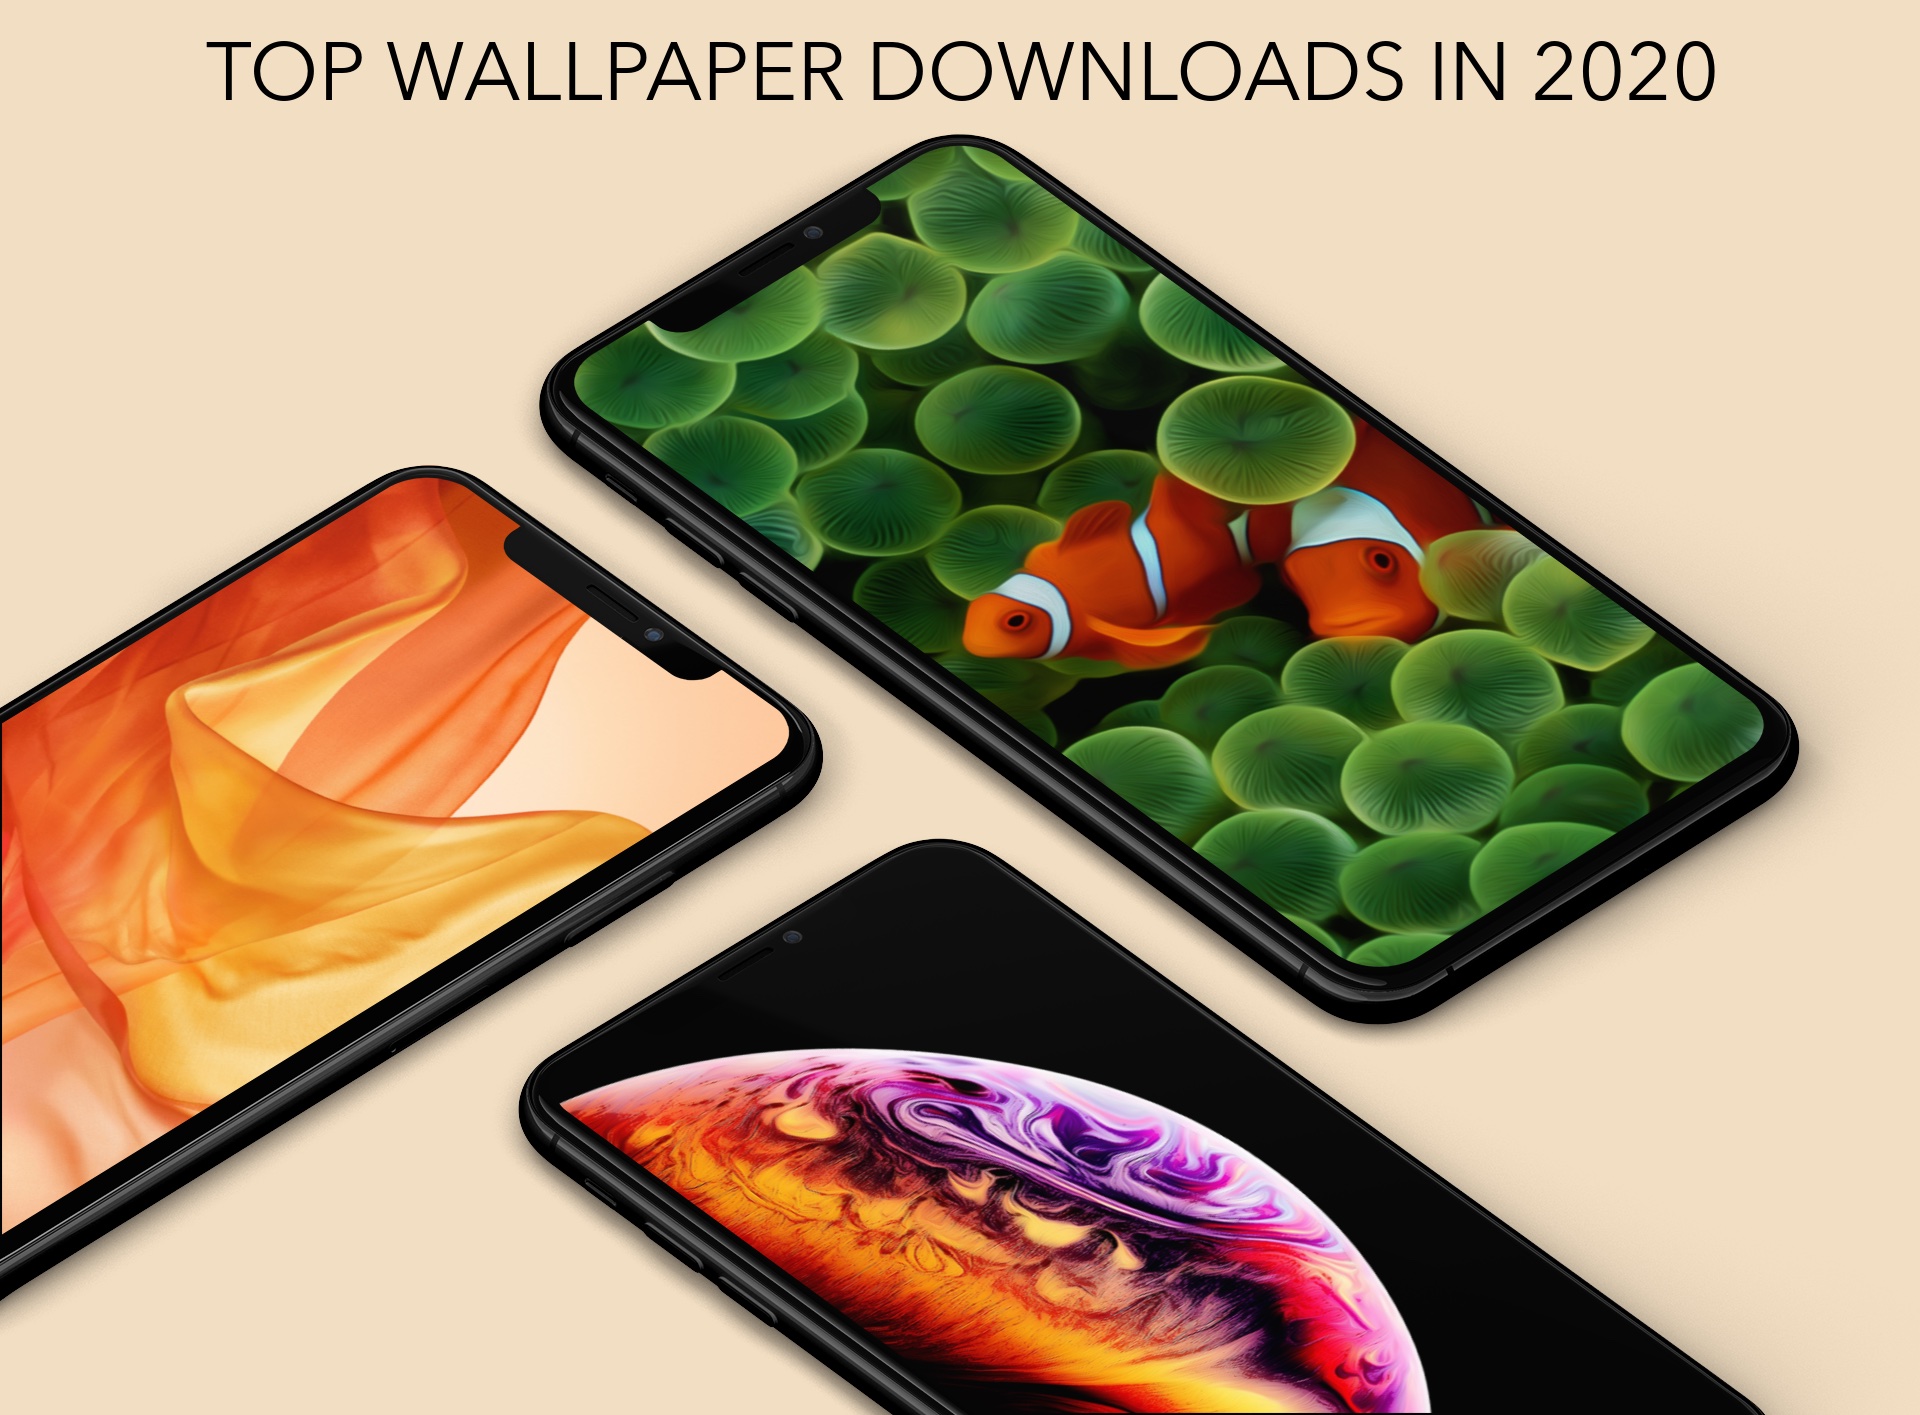 The top wallpapers of 2020